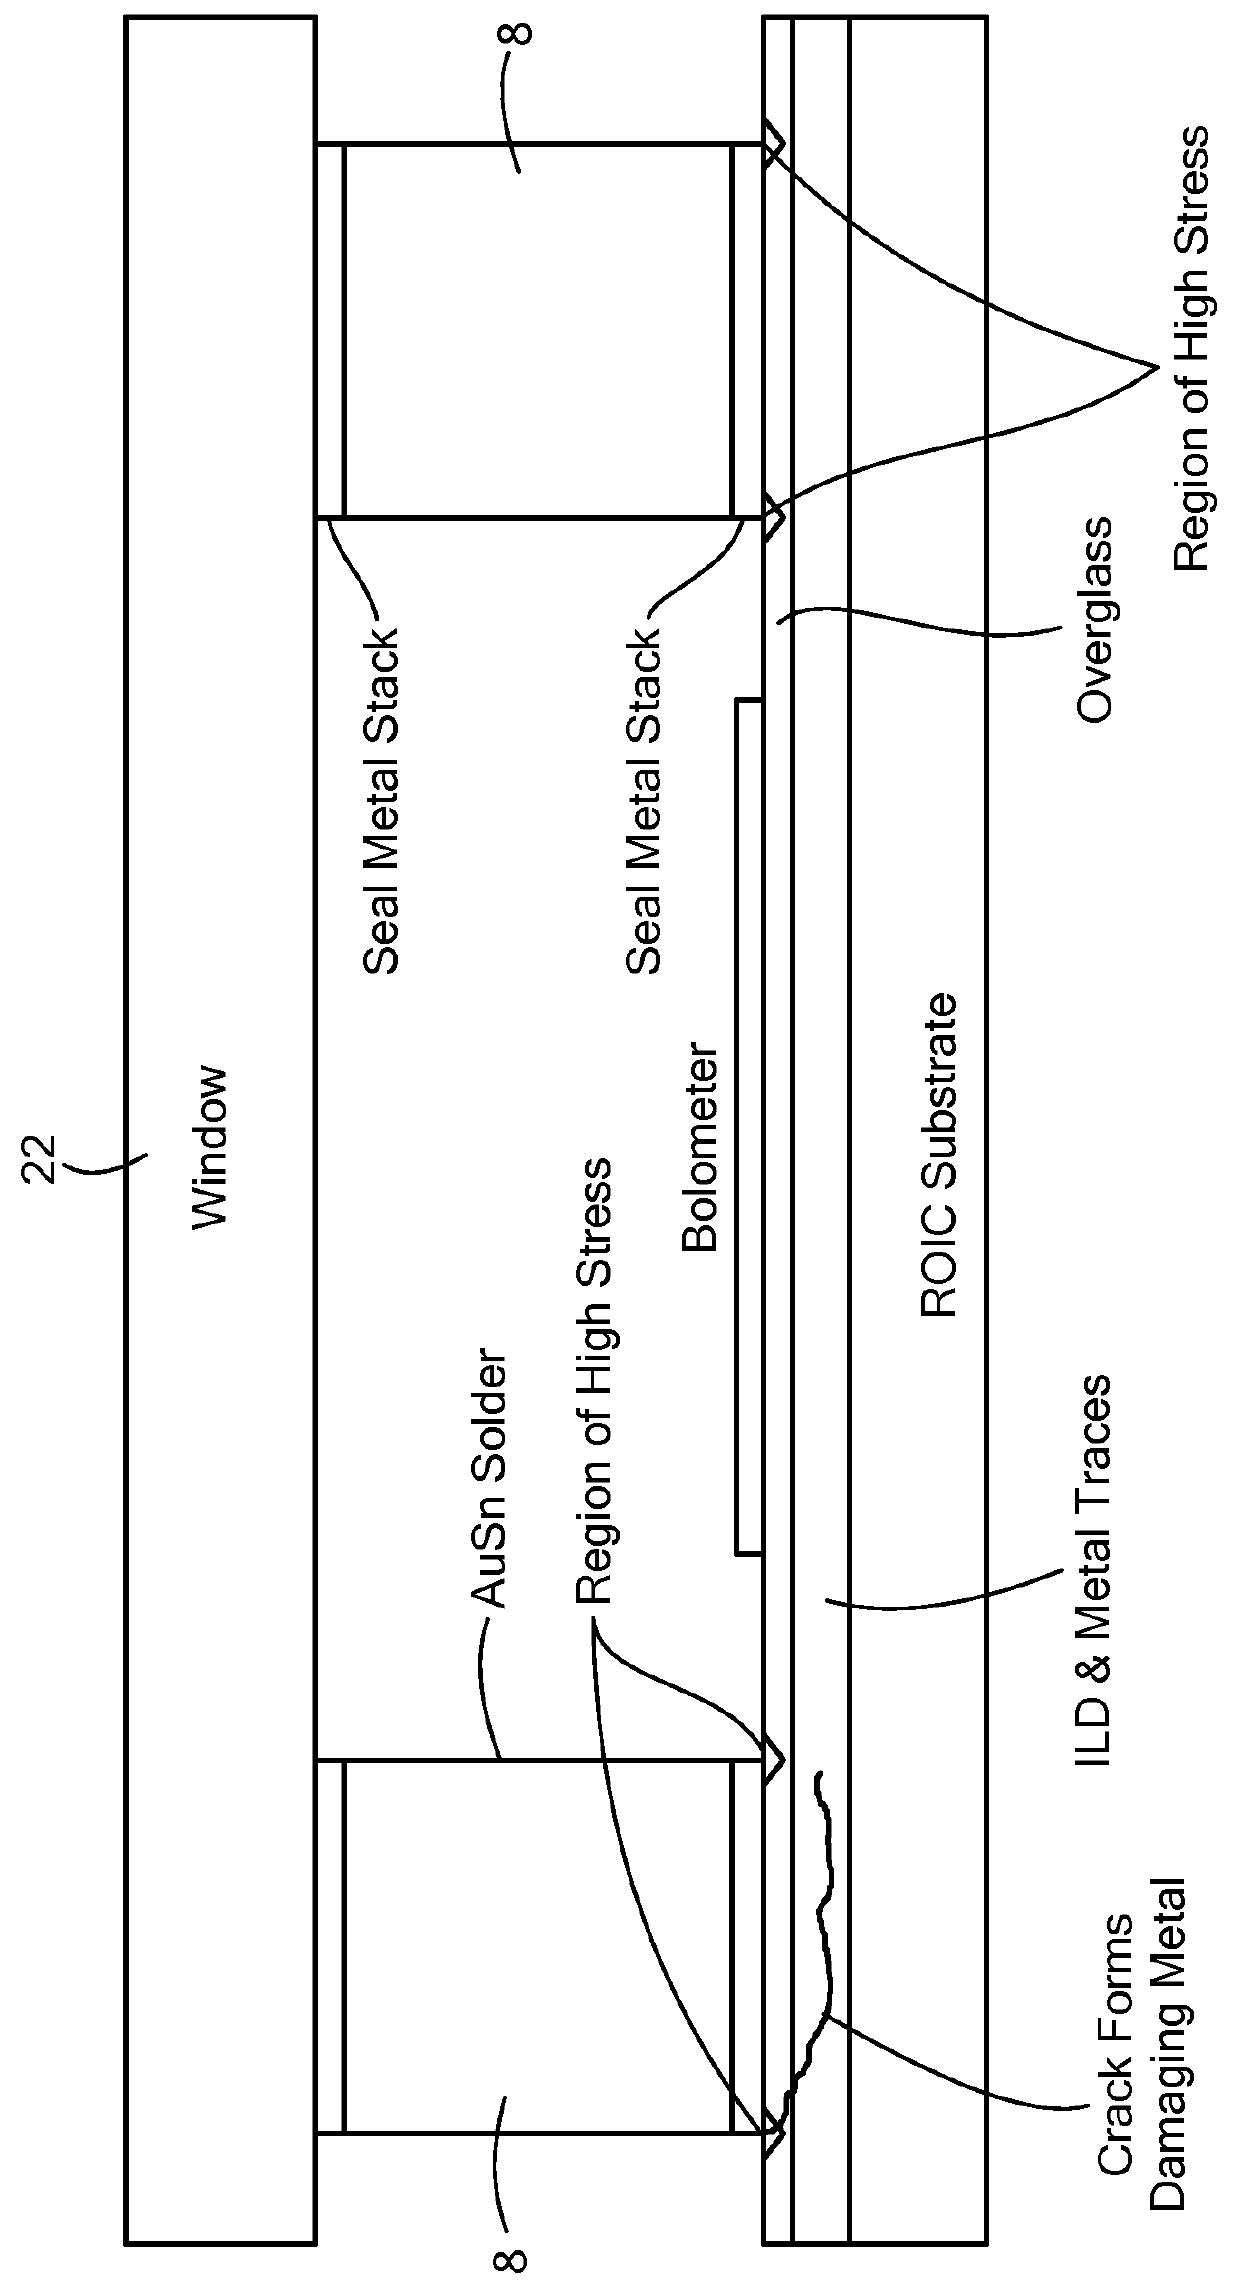 Hermetically sealed package having stress reducing layer